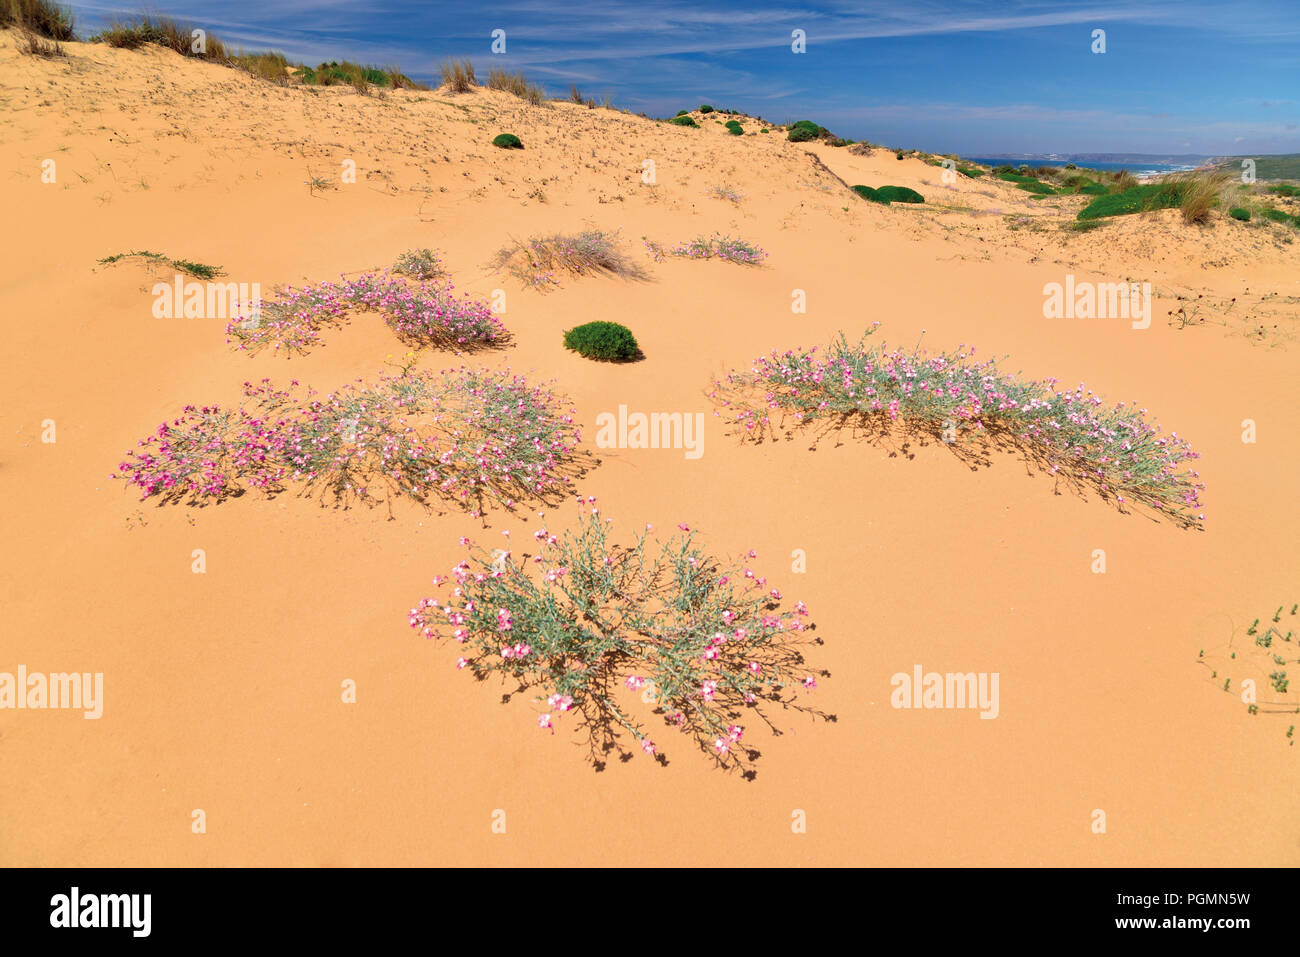 Sand dunes with little pink flowers growing in the sand Stock Photo